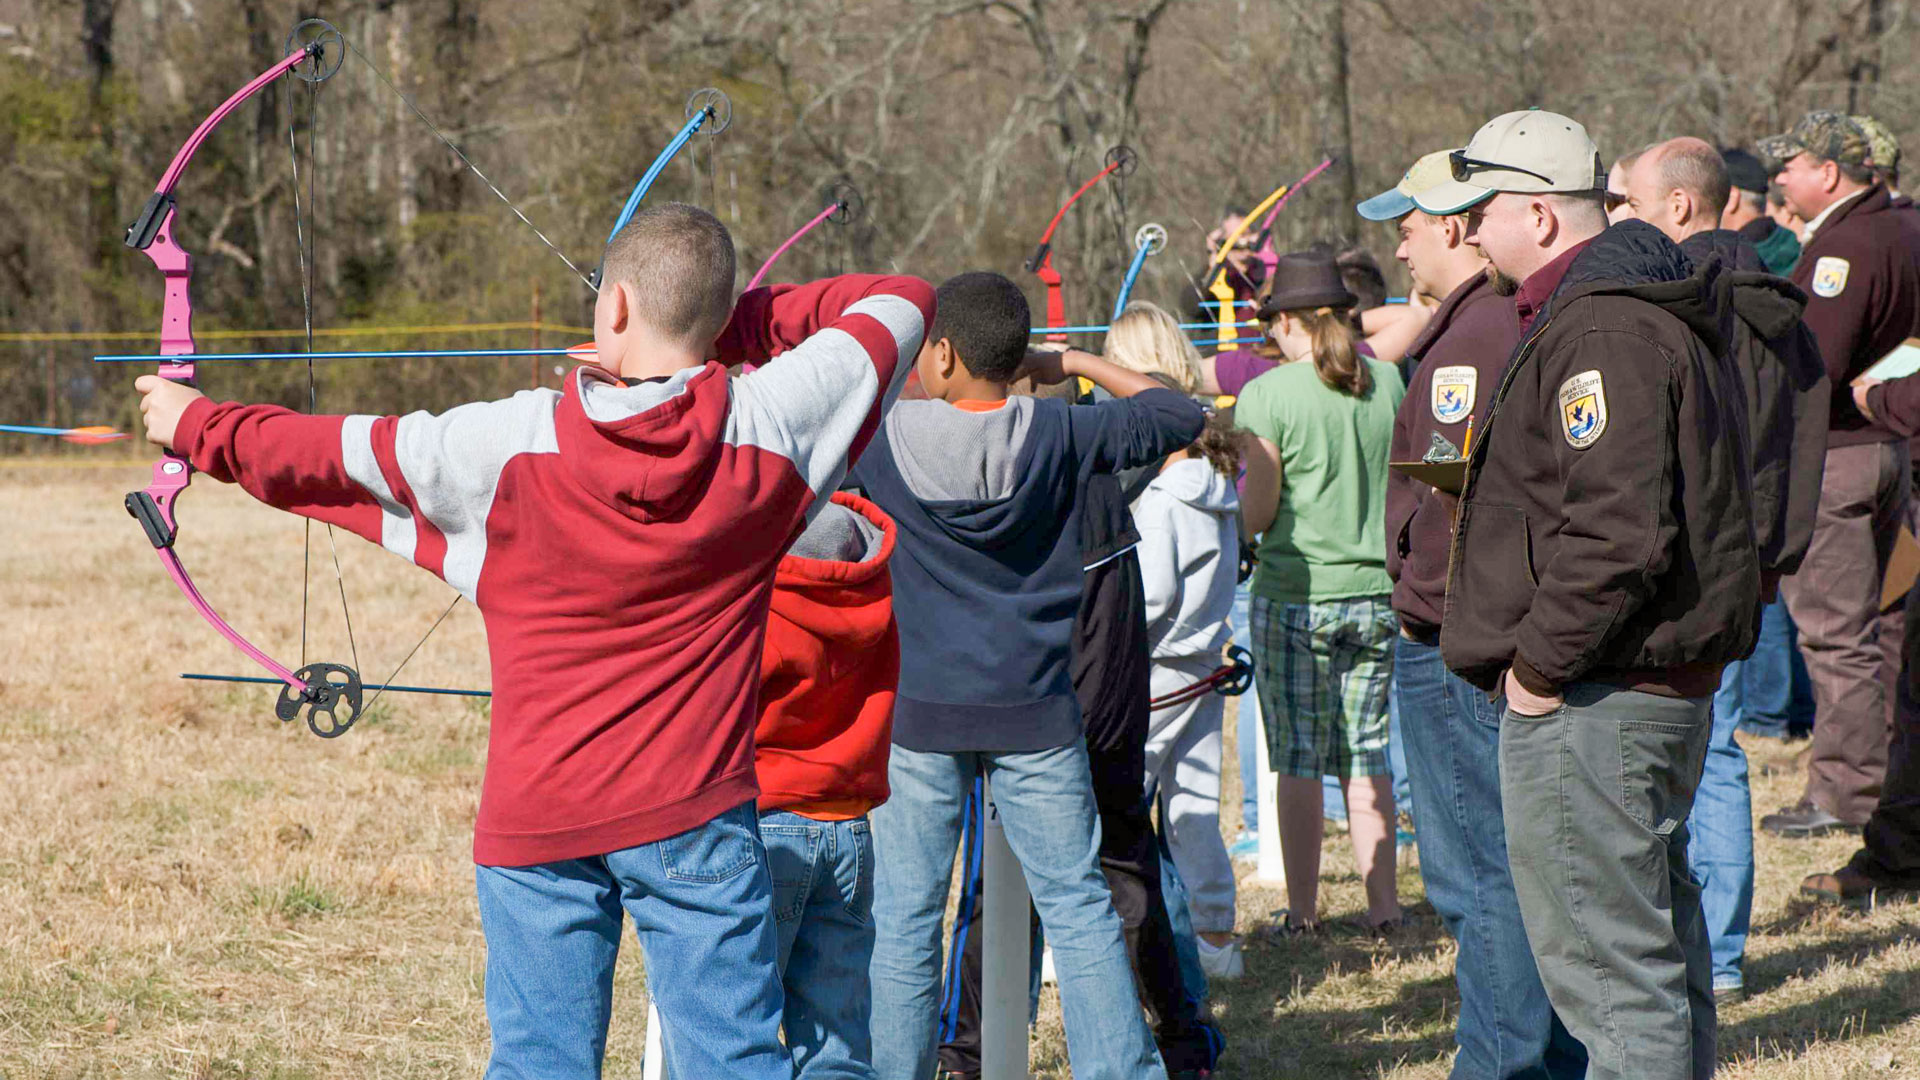 group of teens practices archery target shooting